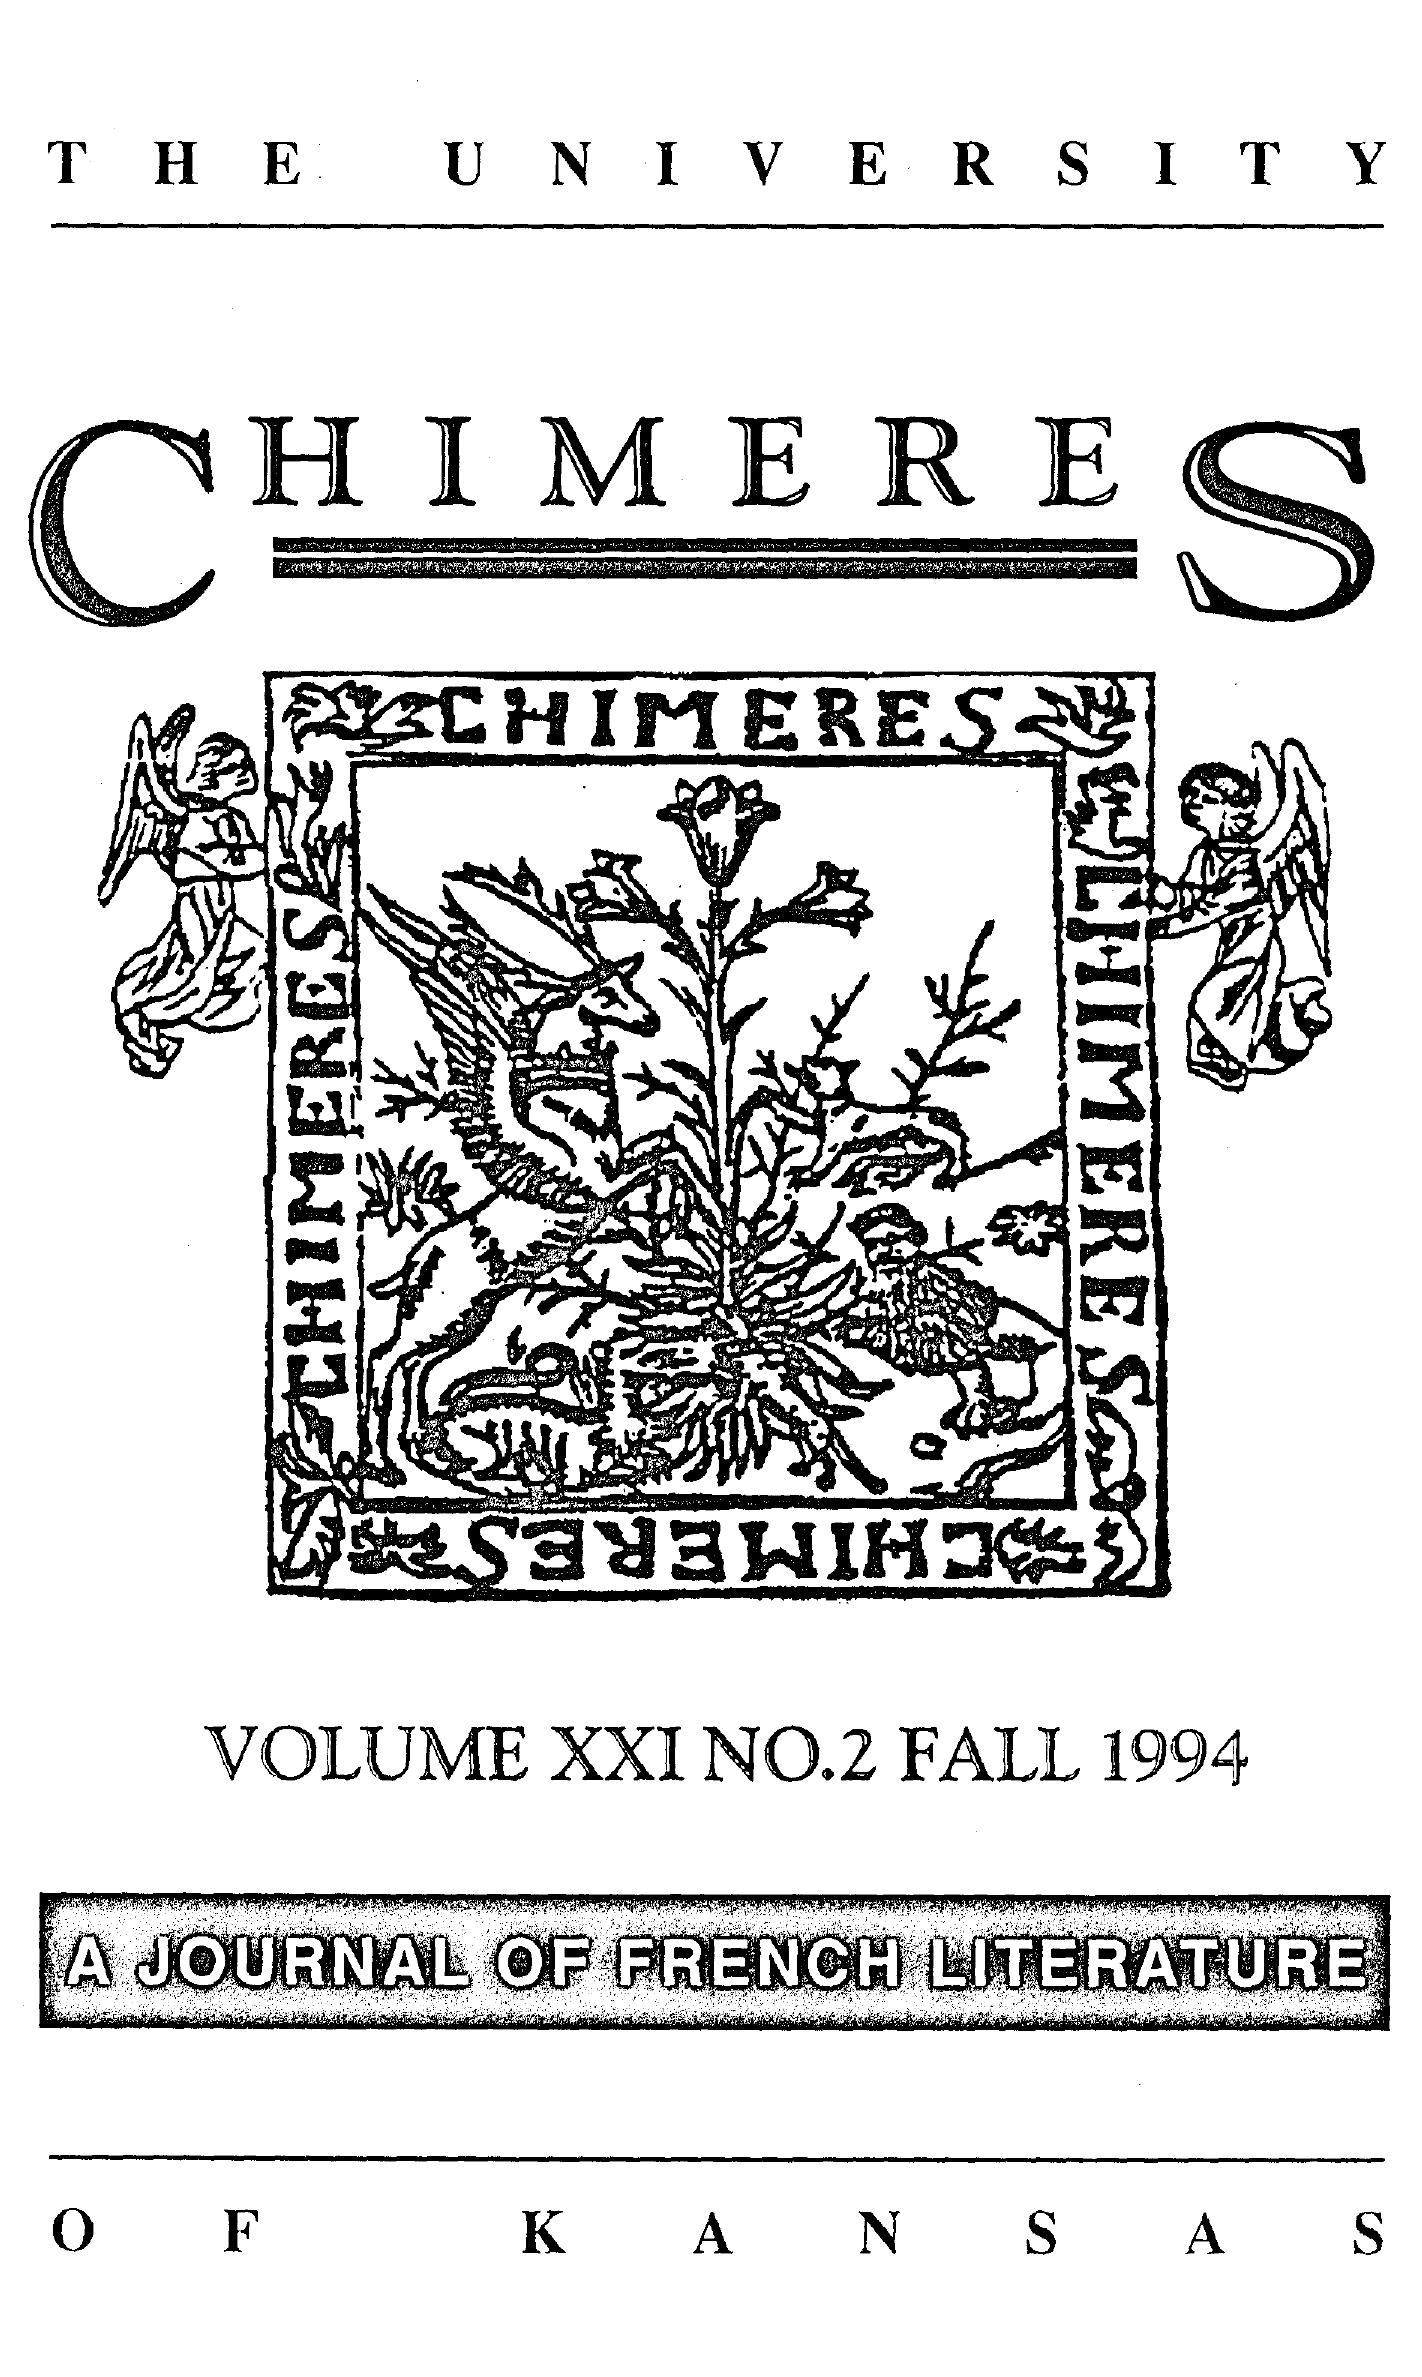 Cover for Chimères, Vol. 21.2, Fall 1994